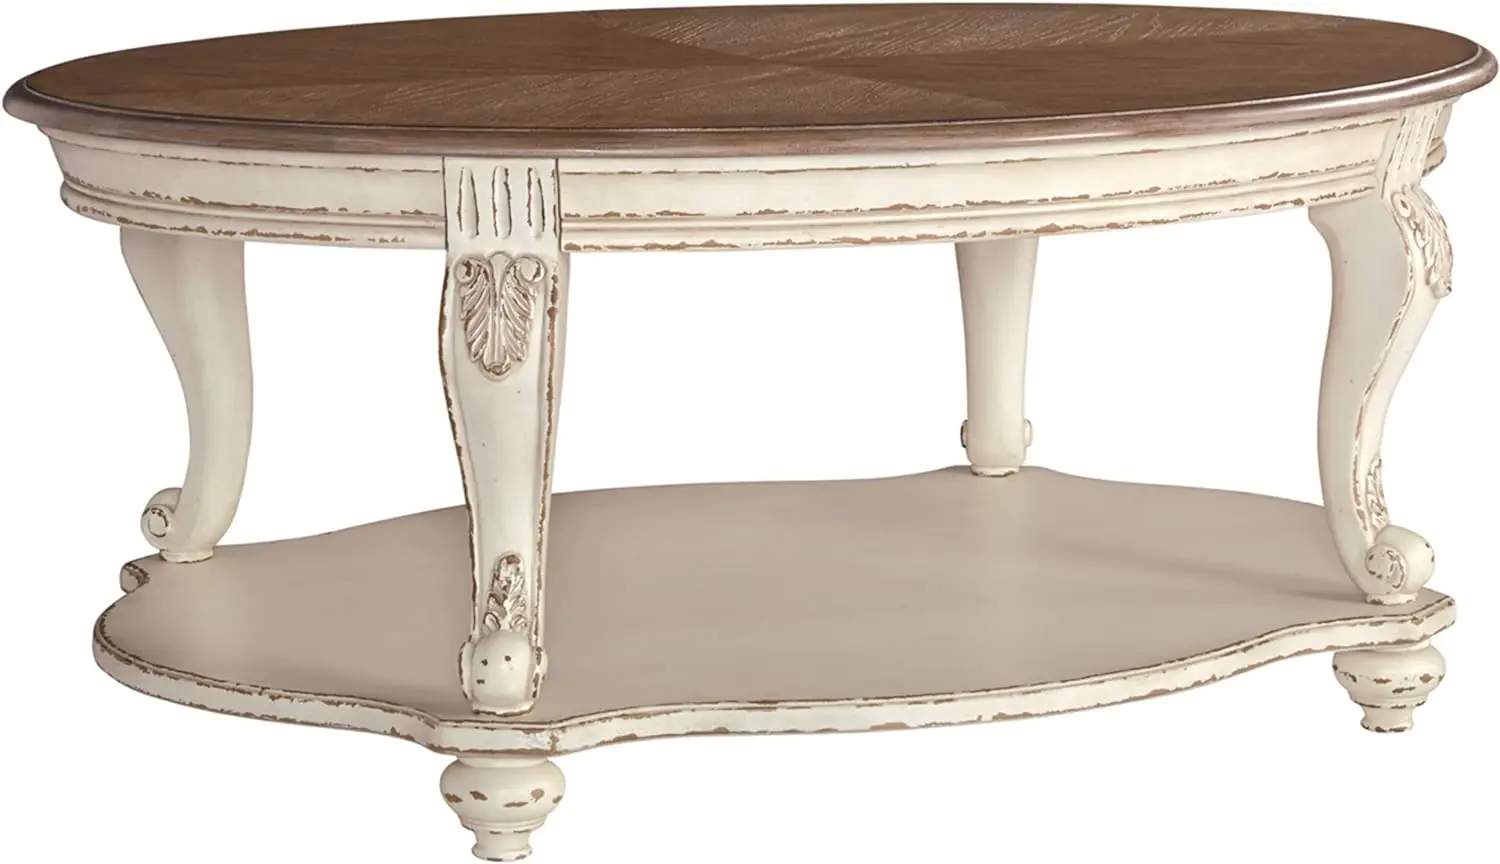 

Signature Design by Ashley Realyn Casual Cottage Coffee Table, Antique White & Brown